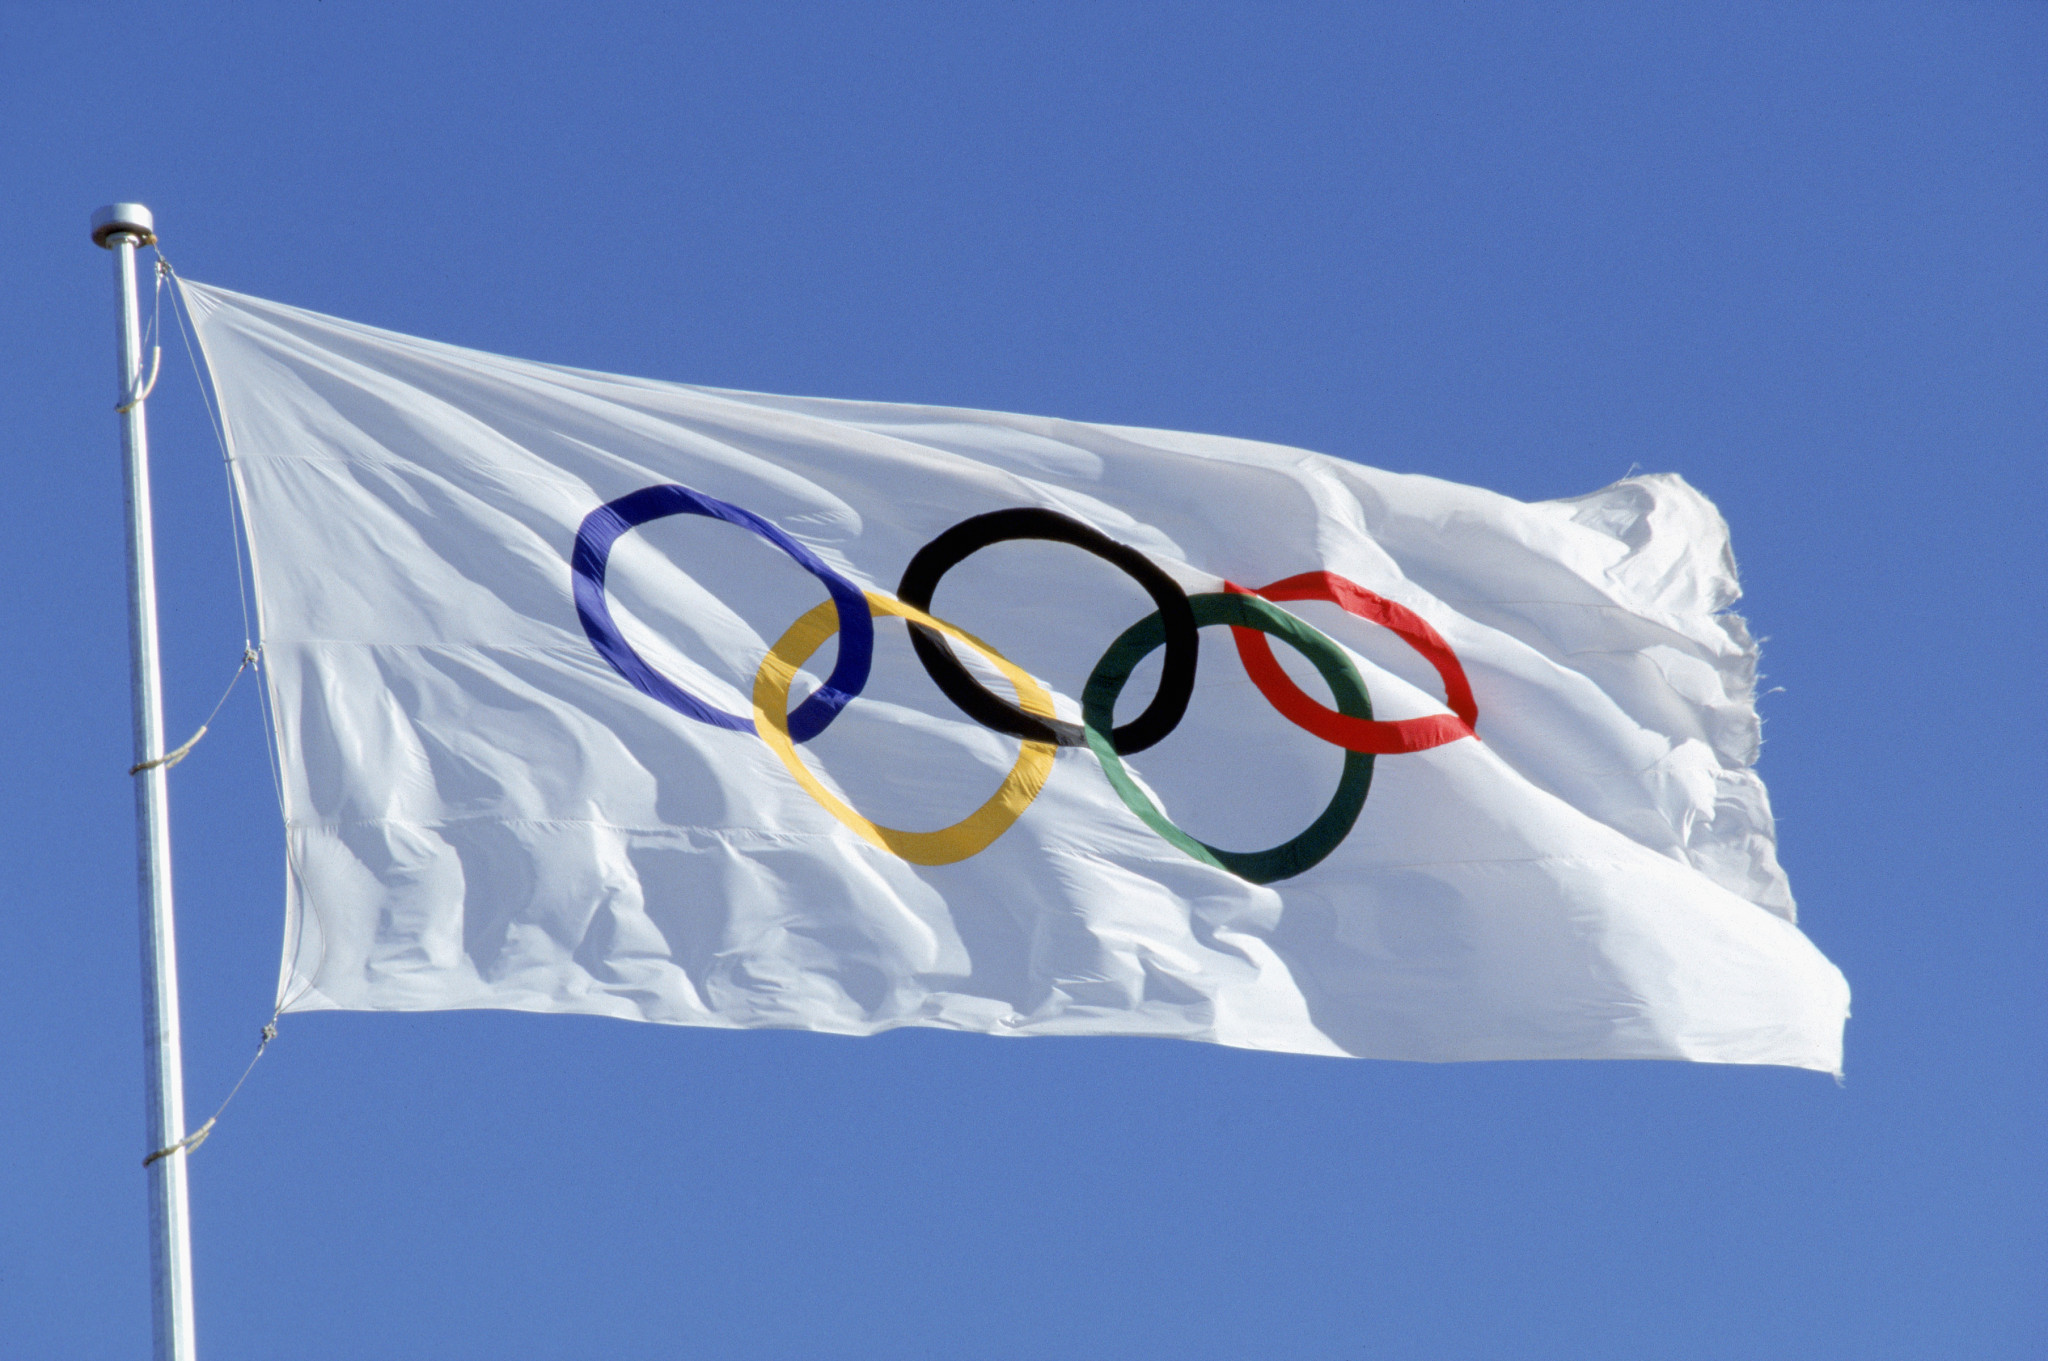 Study finds cost overruns of between 13 and 178 per cent on core capital investments for recent Olympics